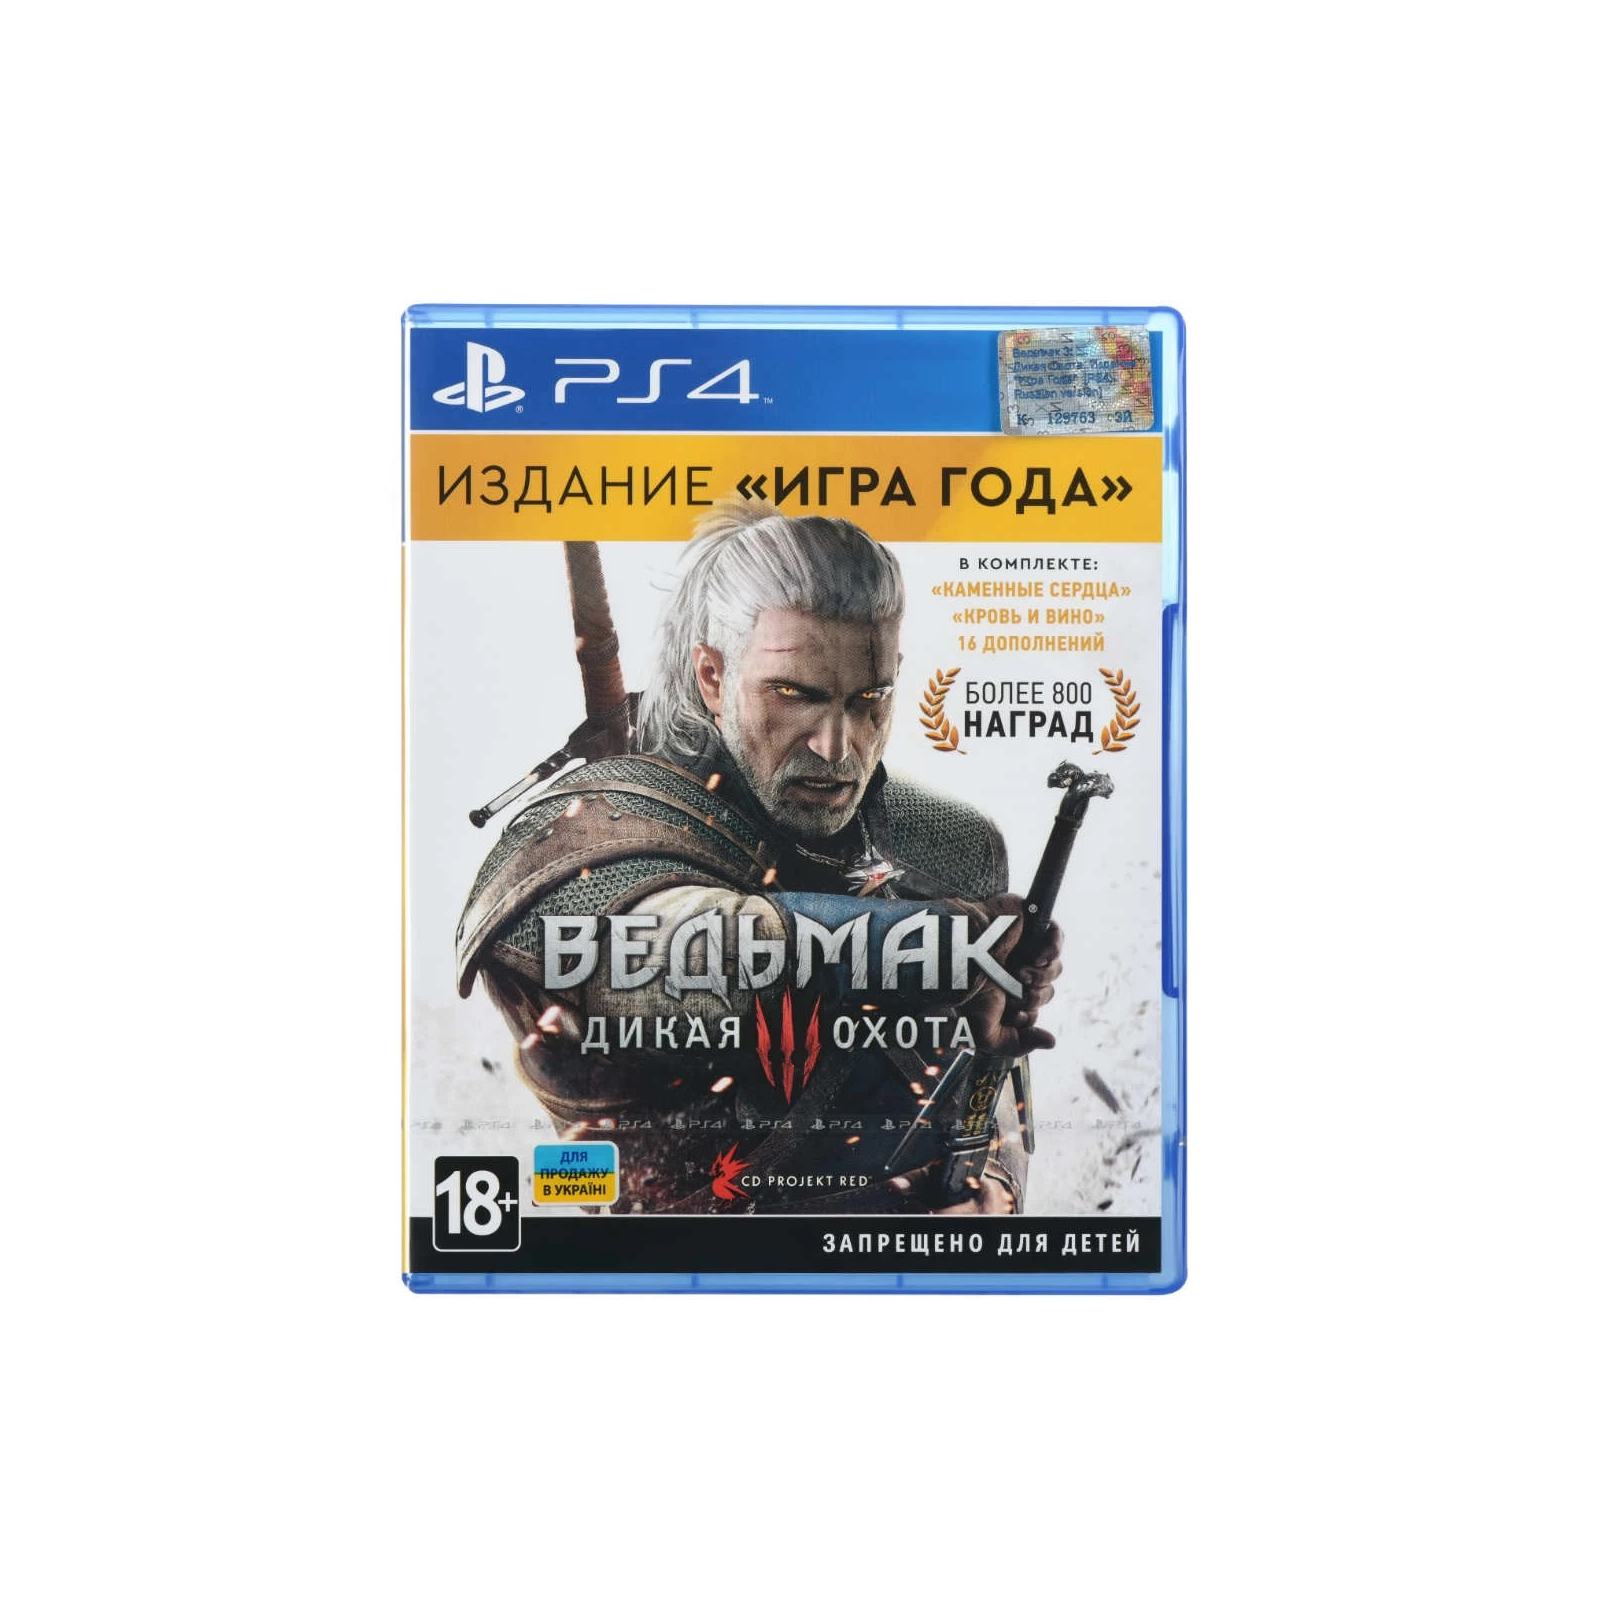 Гра Sony The Witcher 3: Wild Hunt Complete Edition, BD диск (5902367640484)